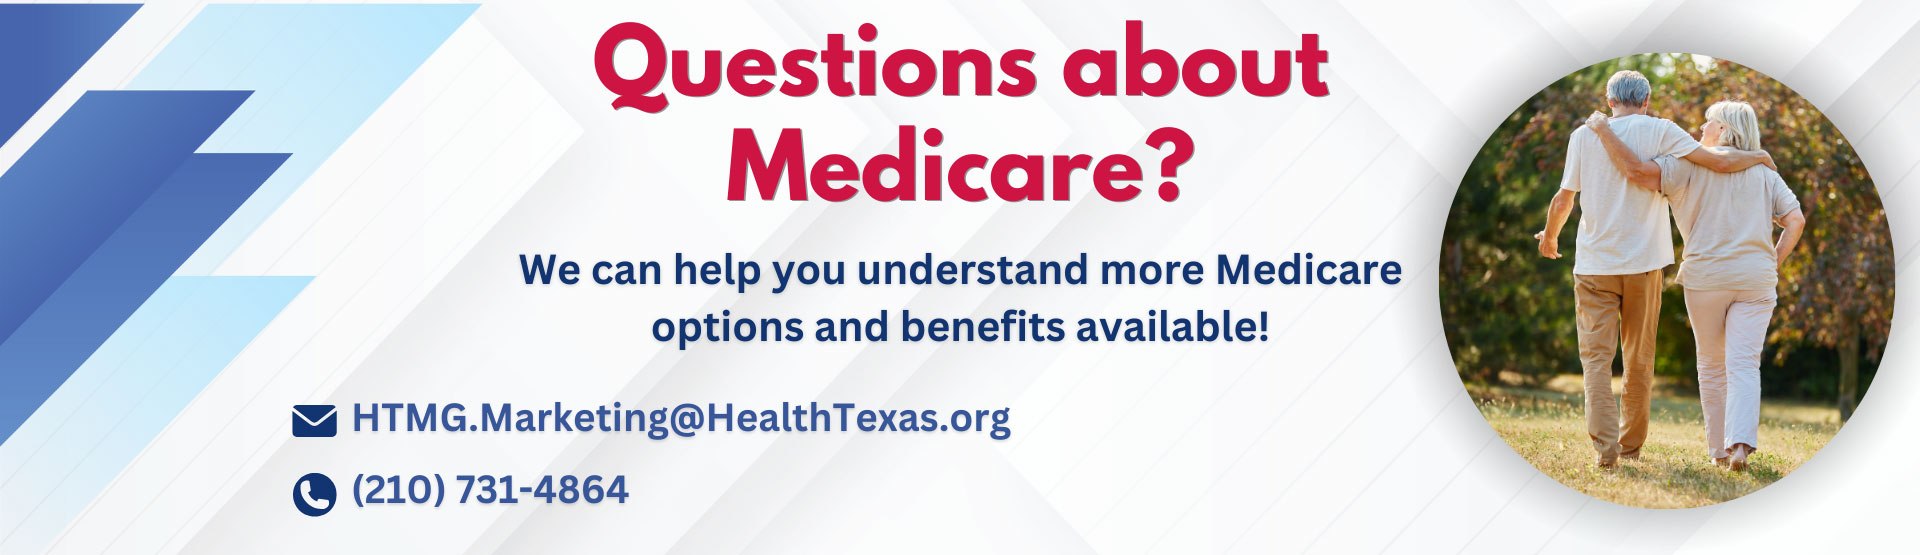 Questions about medicare banner